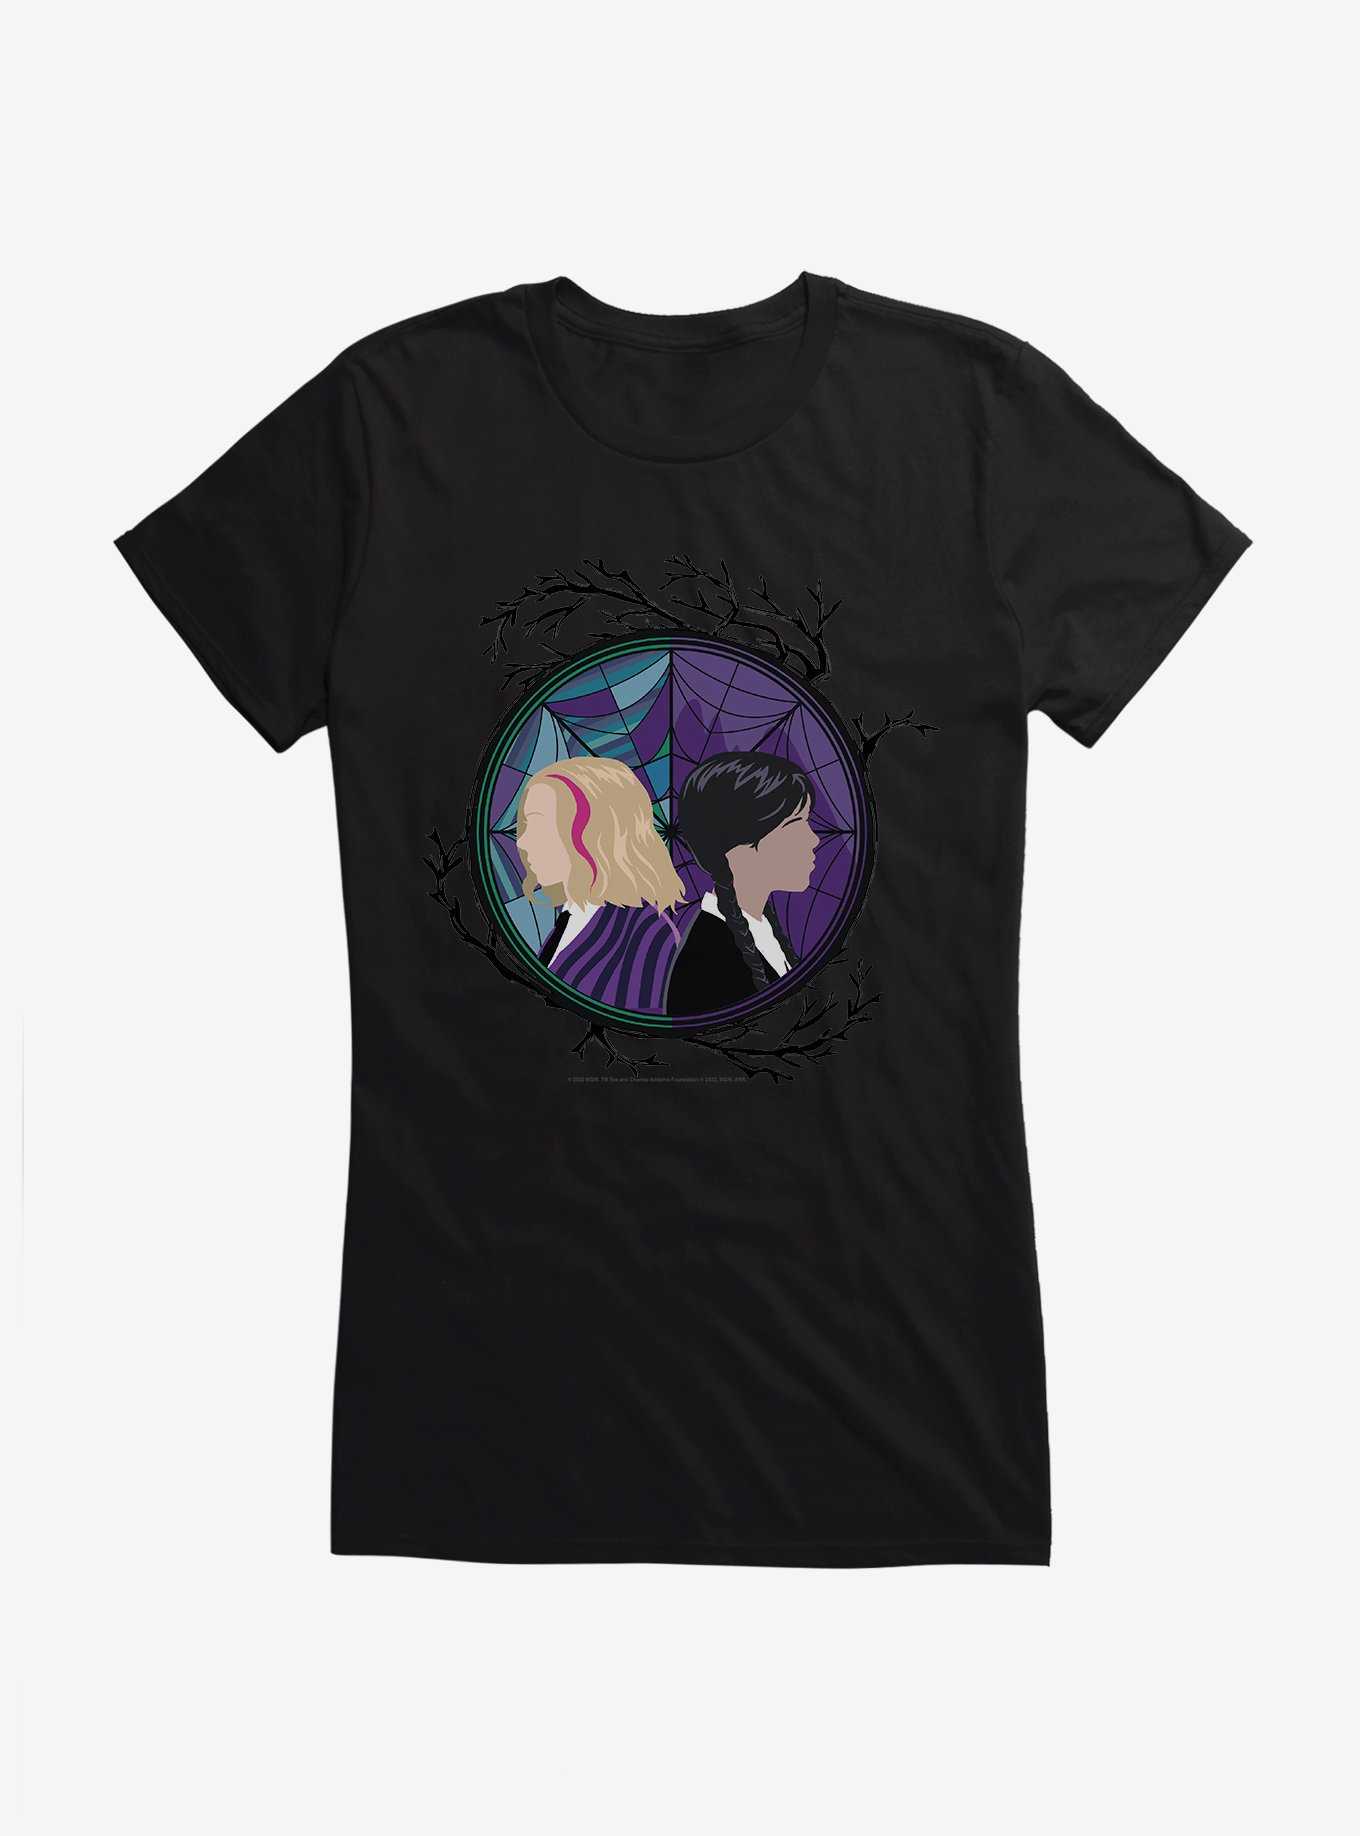 Wednesday TV Series Enid And Wednesday Portrait Girls T-Shirt, , hi-res